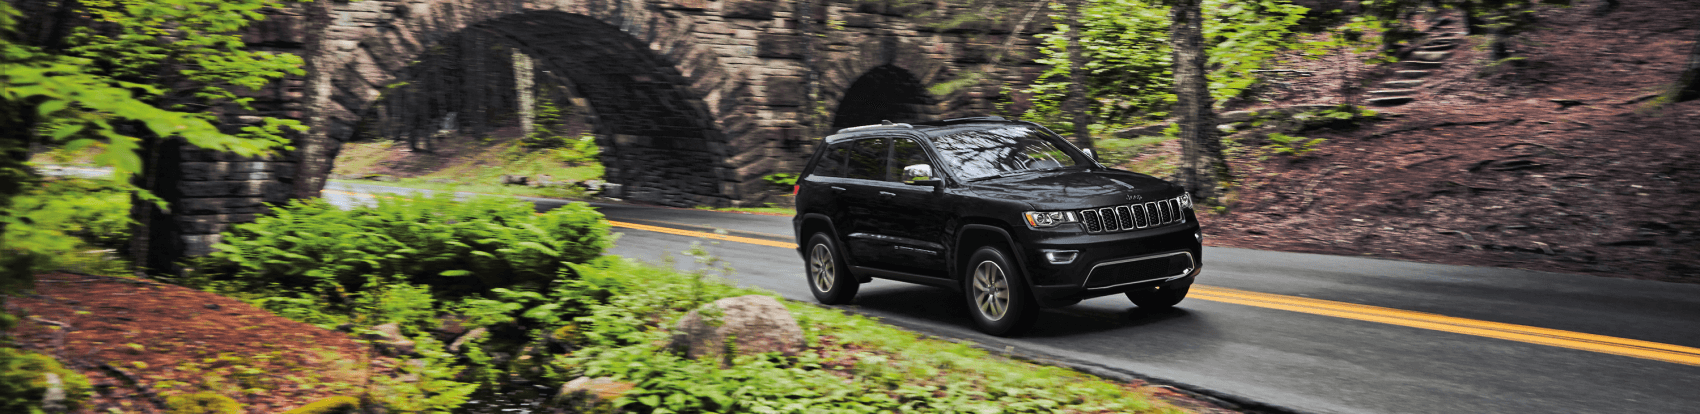 Jeep Grand Cherokee on the Road